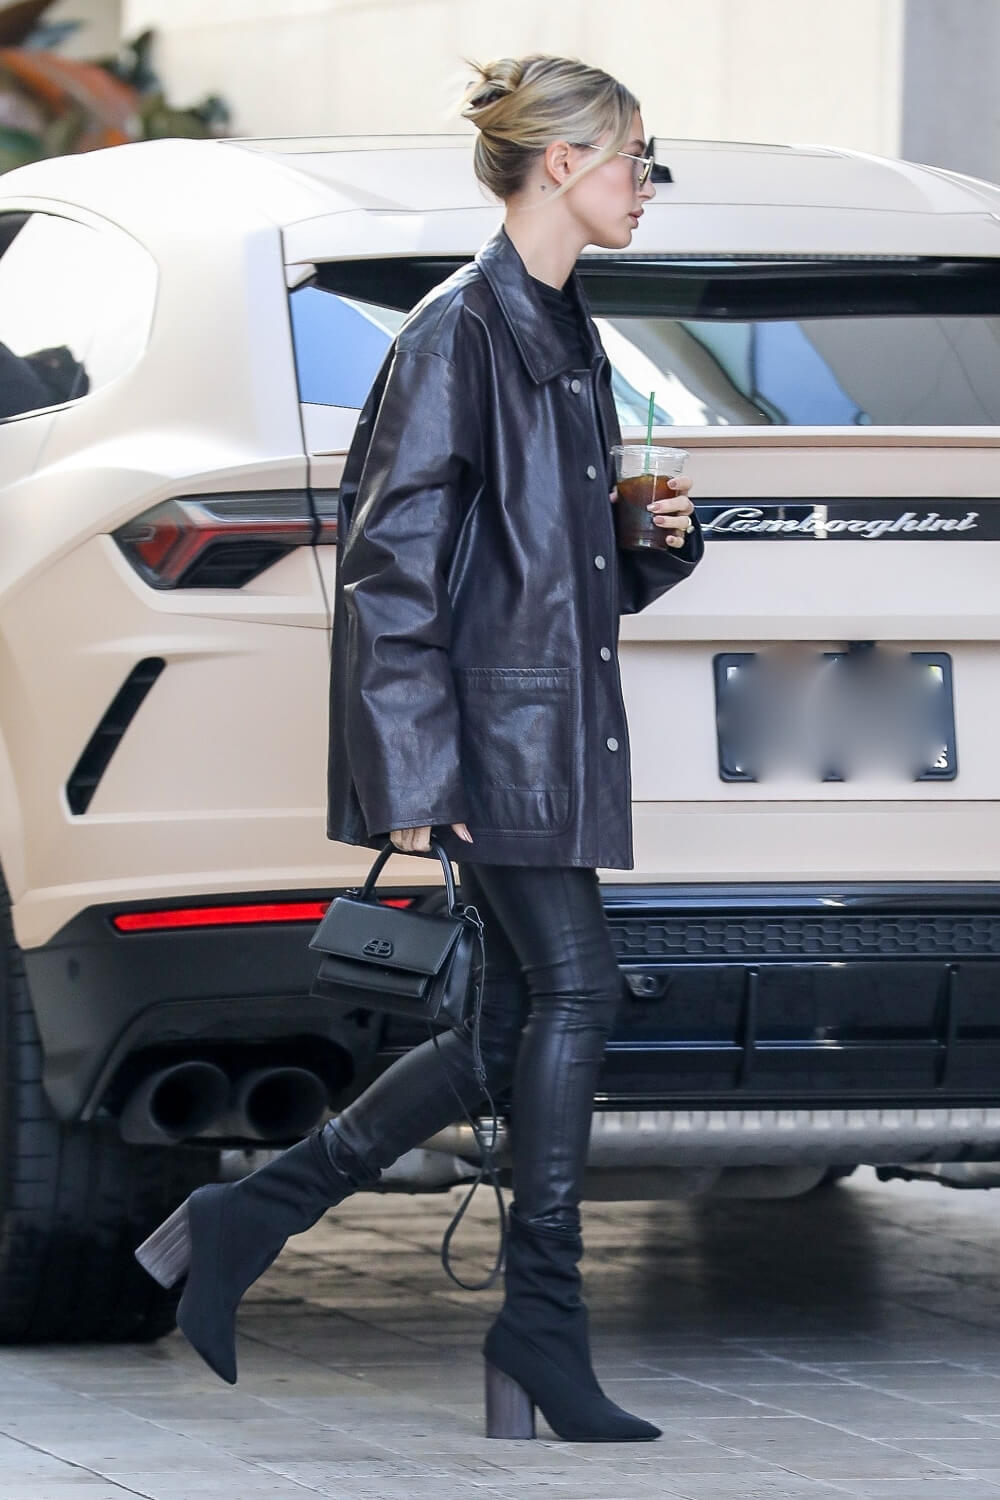 Hailey Bieber looks chic in all black ahead of a lunch meeting